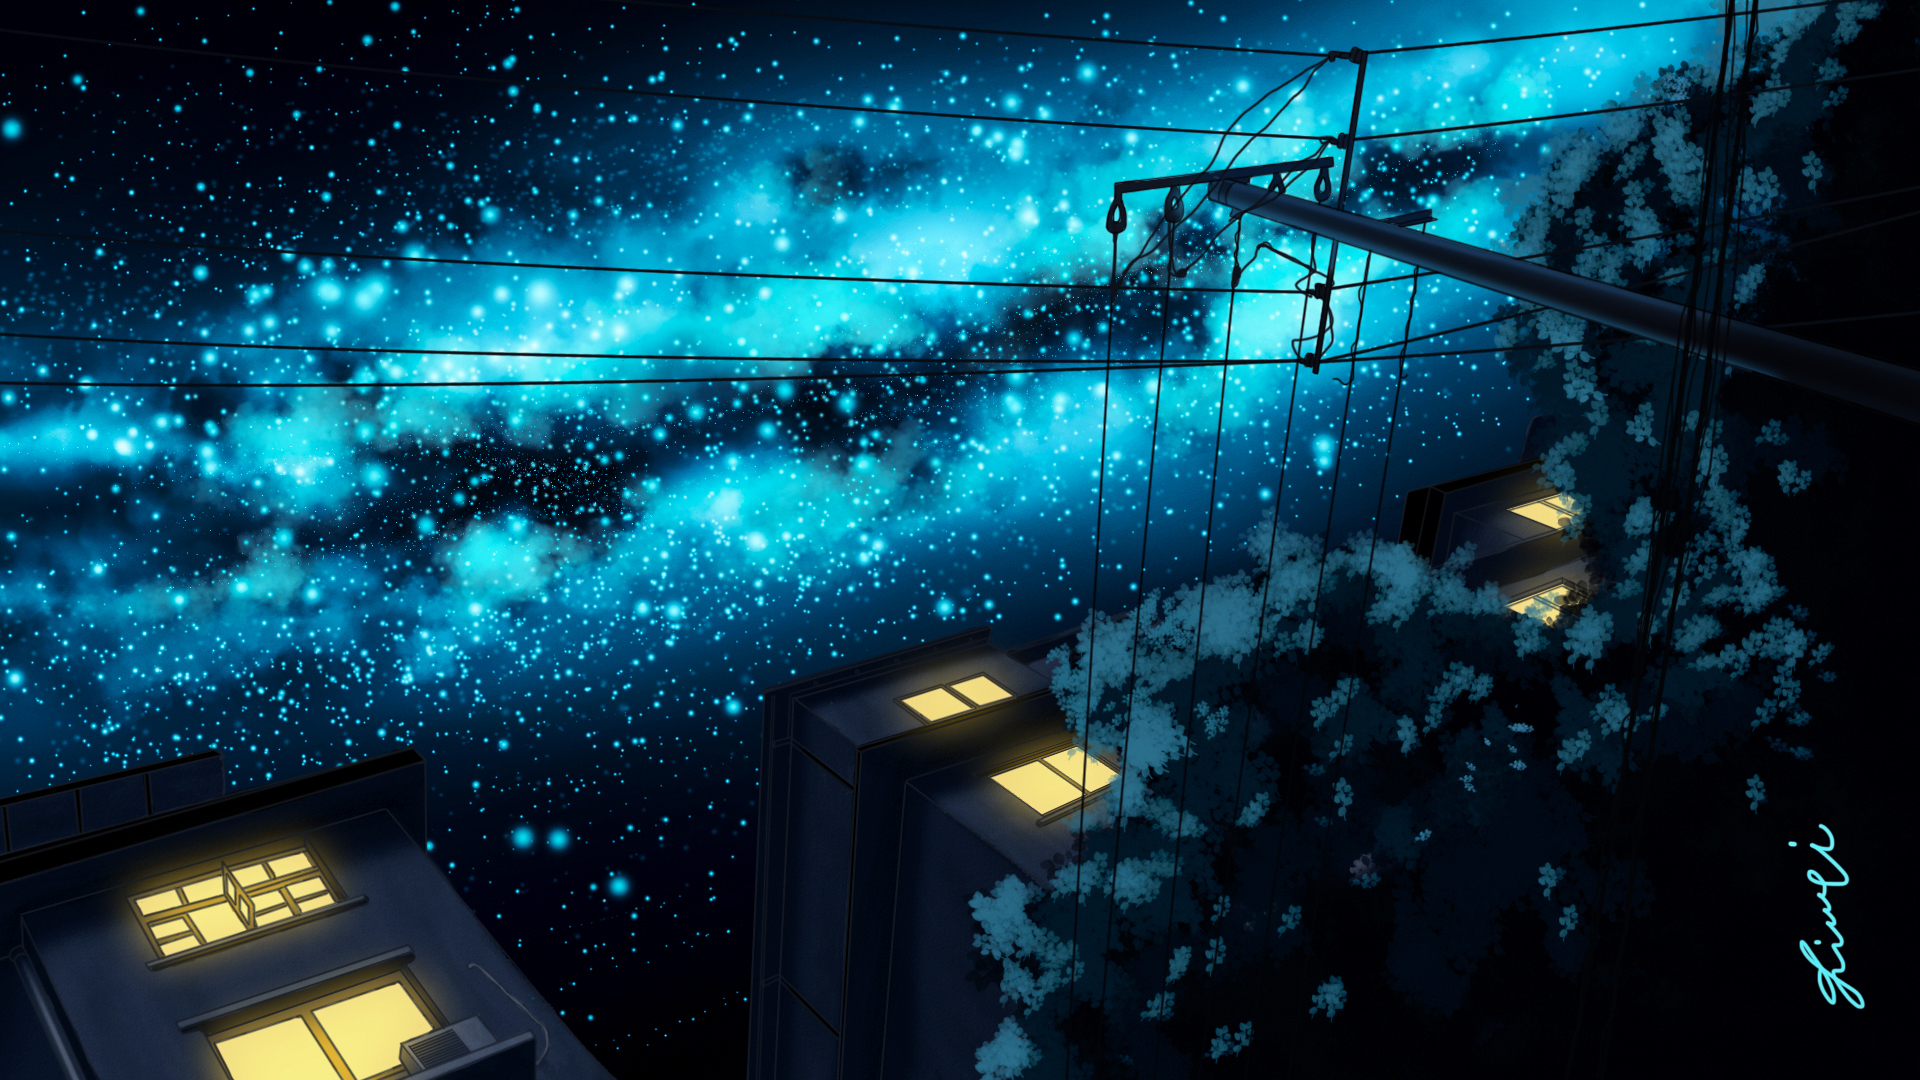 HD desktop wallpaper: Anime, Night, Starry Sky, House download free picture  #968395